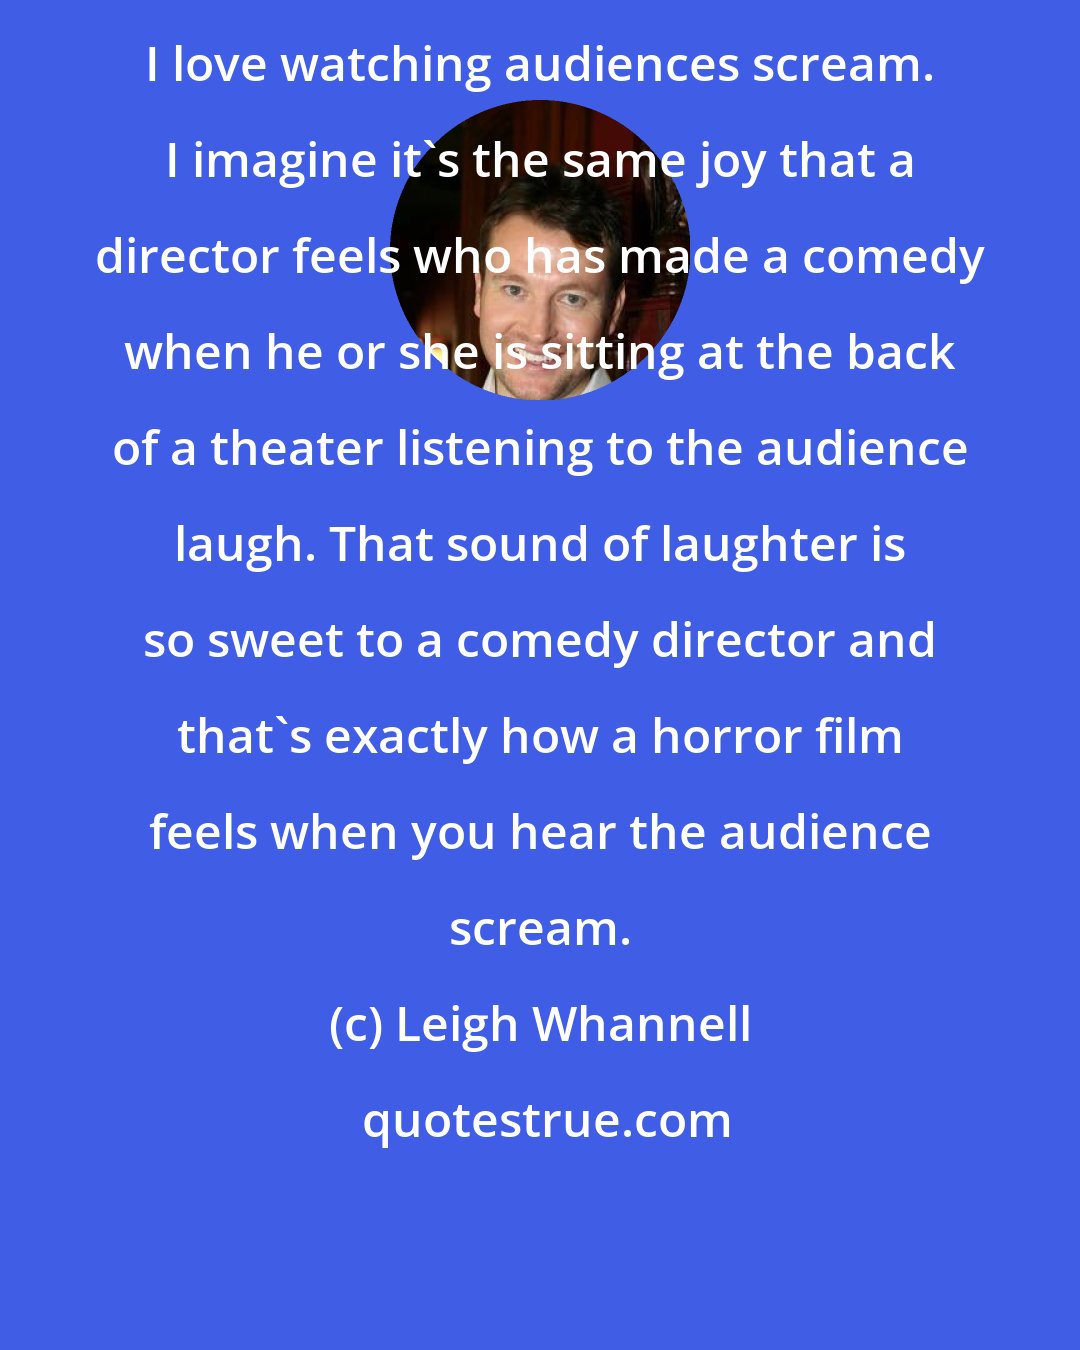 Leigh Whannell: I love watching audiences scream. I imagine it's the same joy that a director feels who has made a comedy when he or she is sitting at the back of a theater listening to the audience laugh. That sound of laughter is so sweet to a comedy director and that's exactly how a horror film feels when you hear the audience scream.